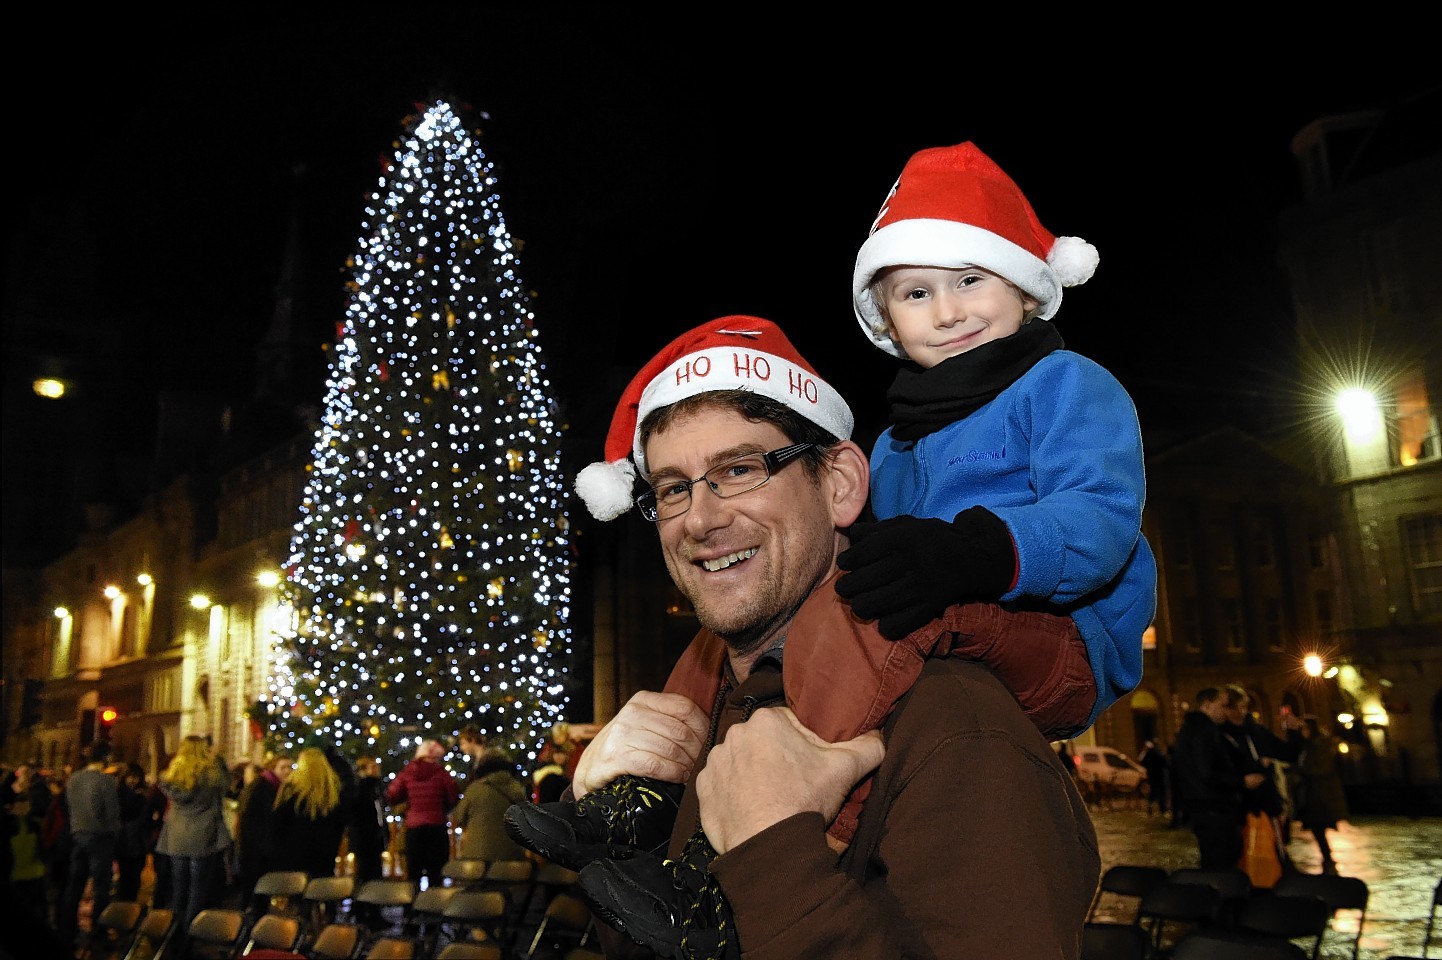 James Myers with his son Sam at the lighting up ceremony of Aberdeen's Christmas tree at Castlegate.